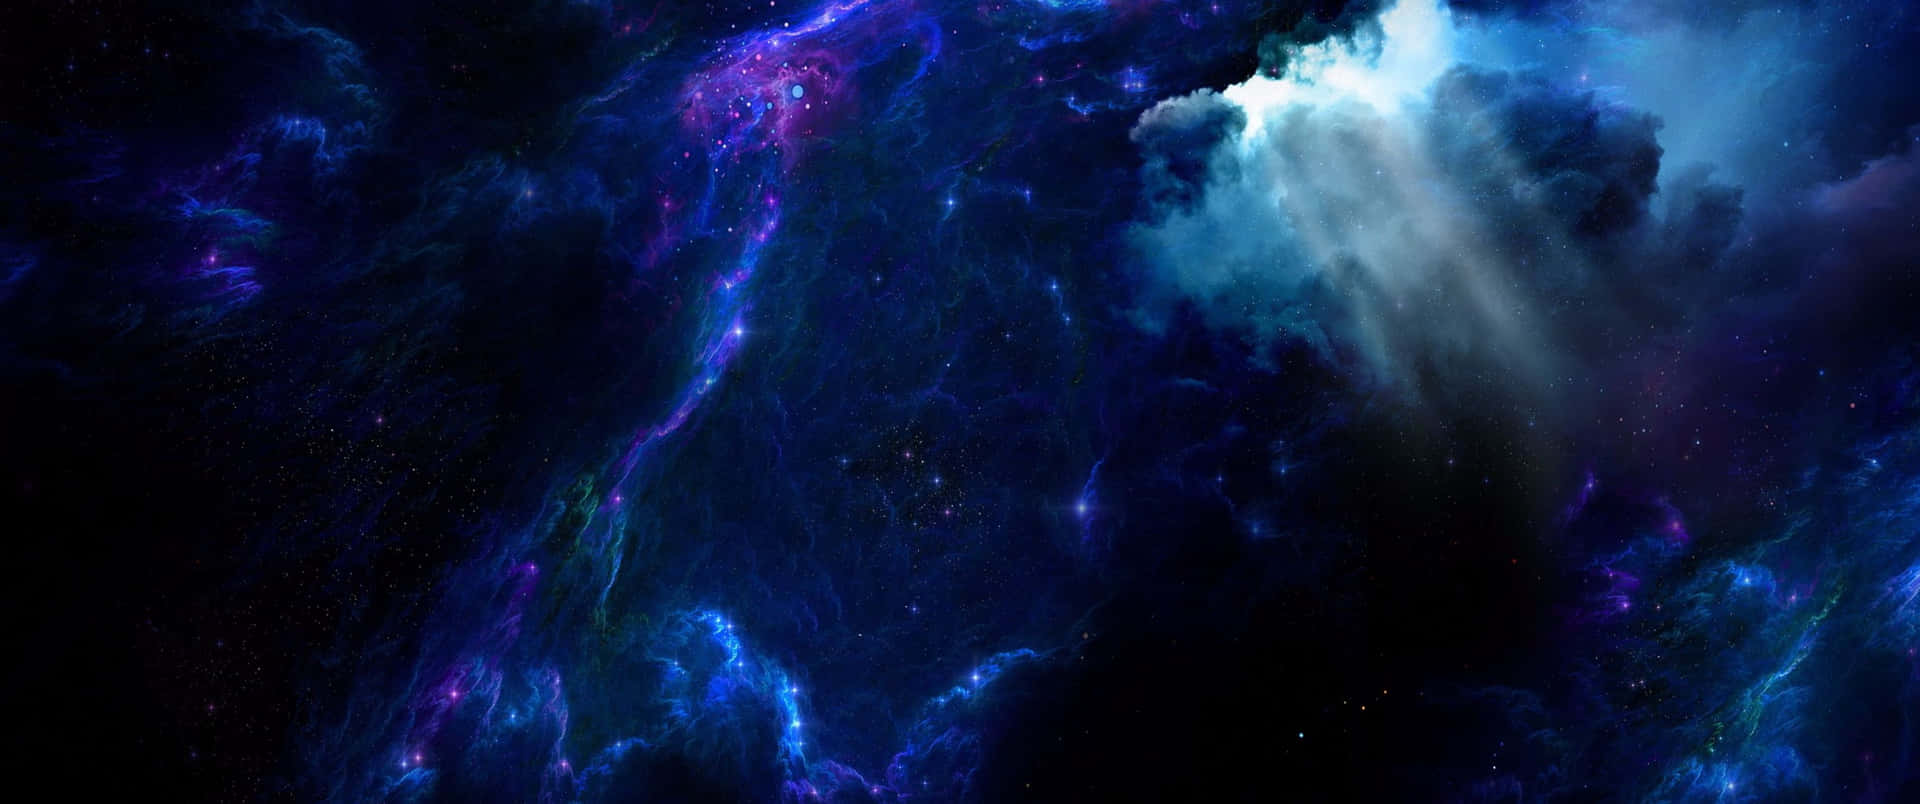 A Blue And Purple Space With Clouds And Stars